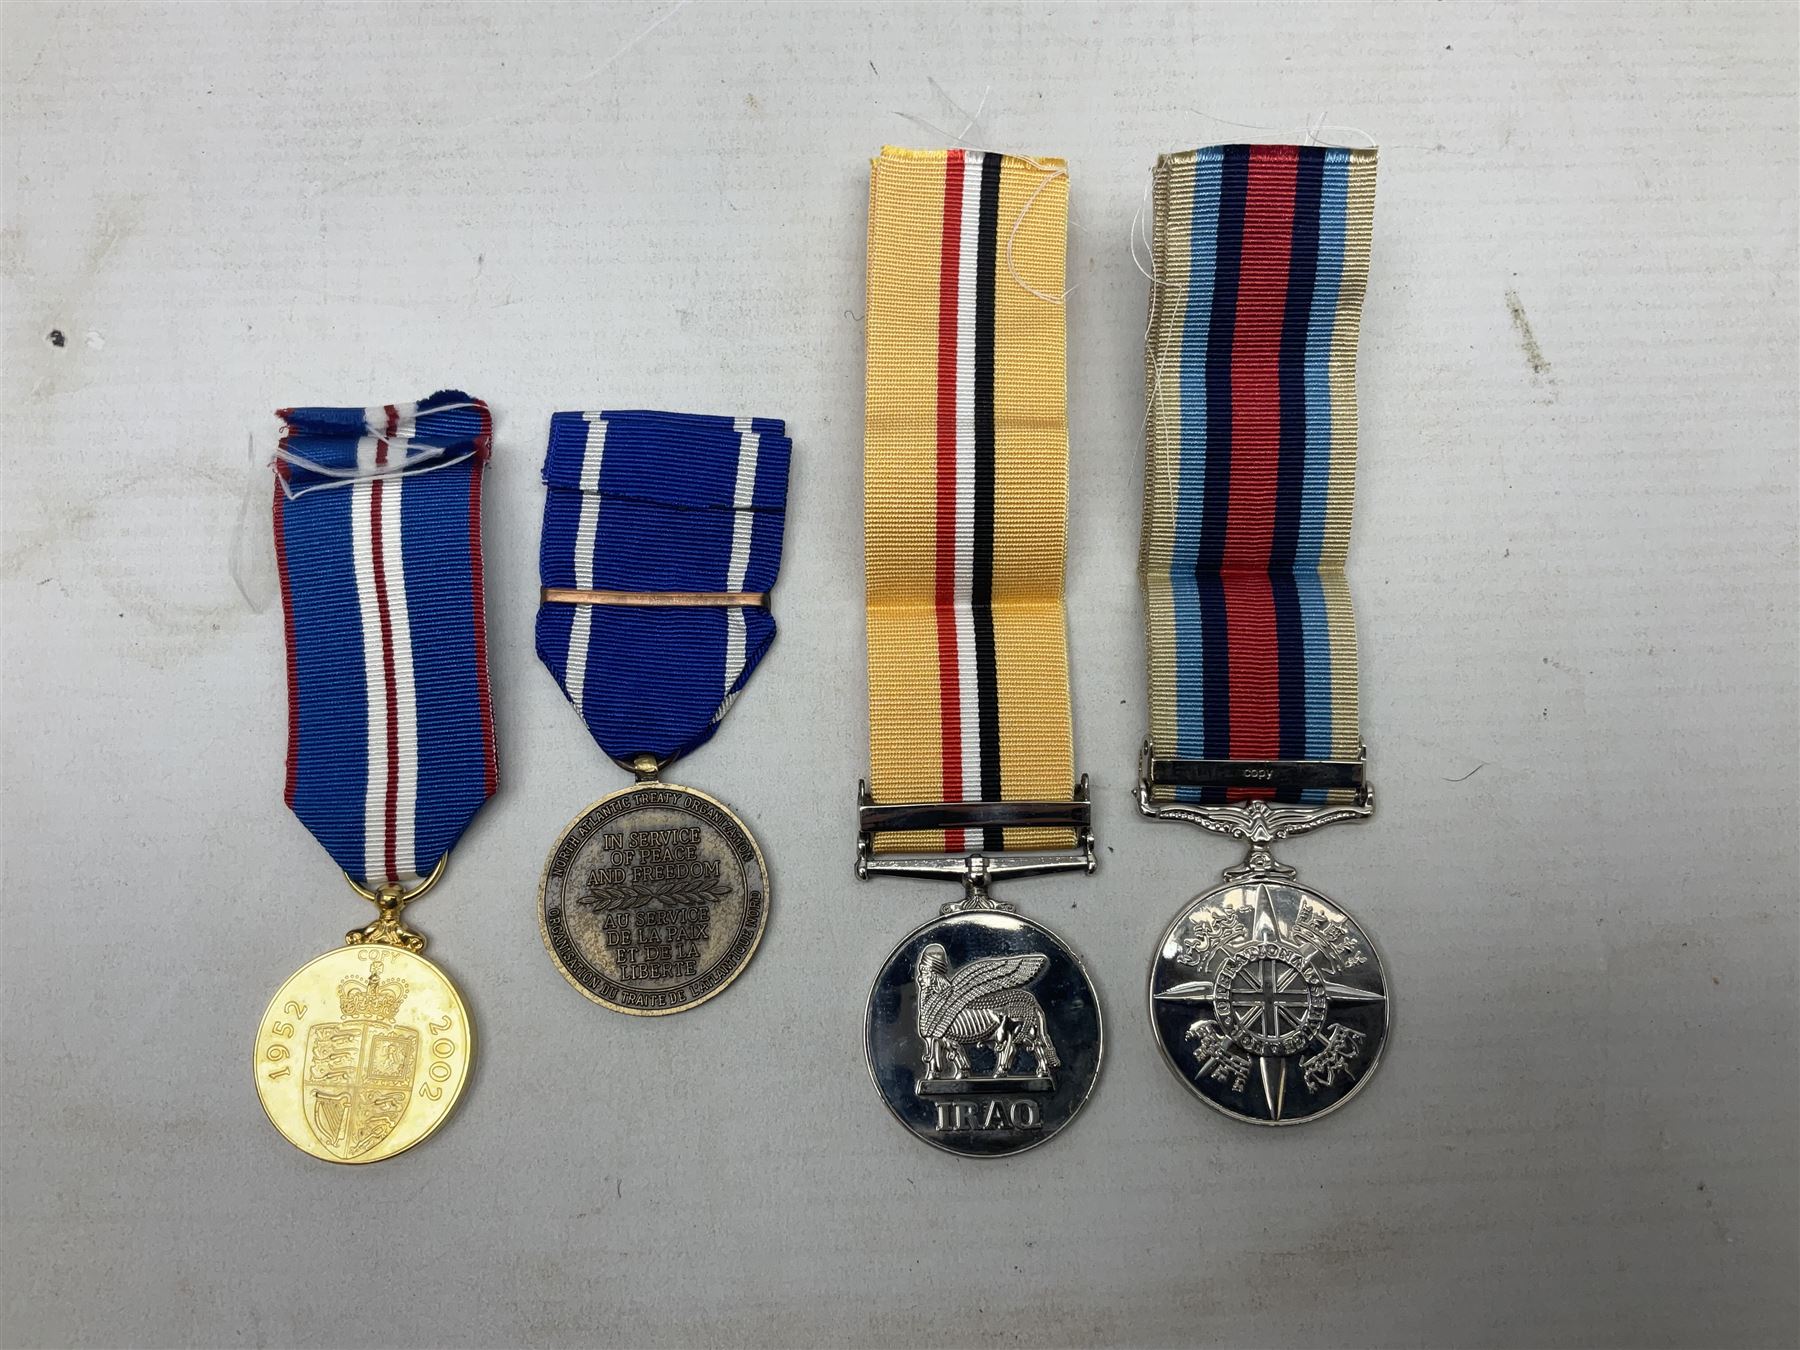 NATO Service Medal with clasp for Former Yugoslavia; together with three copy medals - Iraq Medal wi - Image 6 of 11